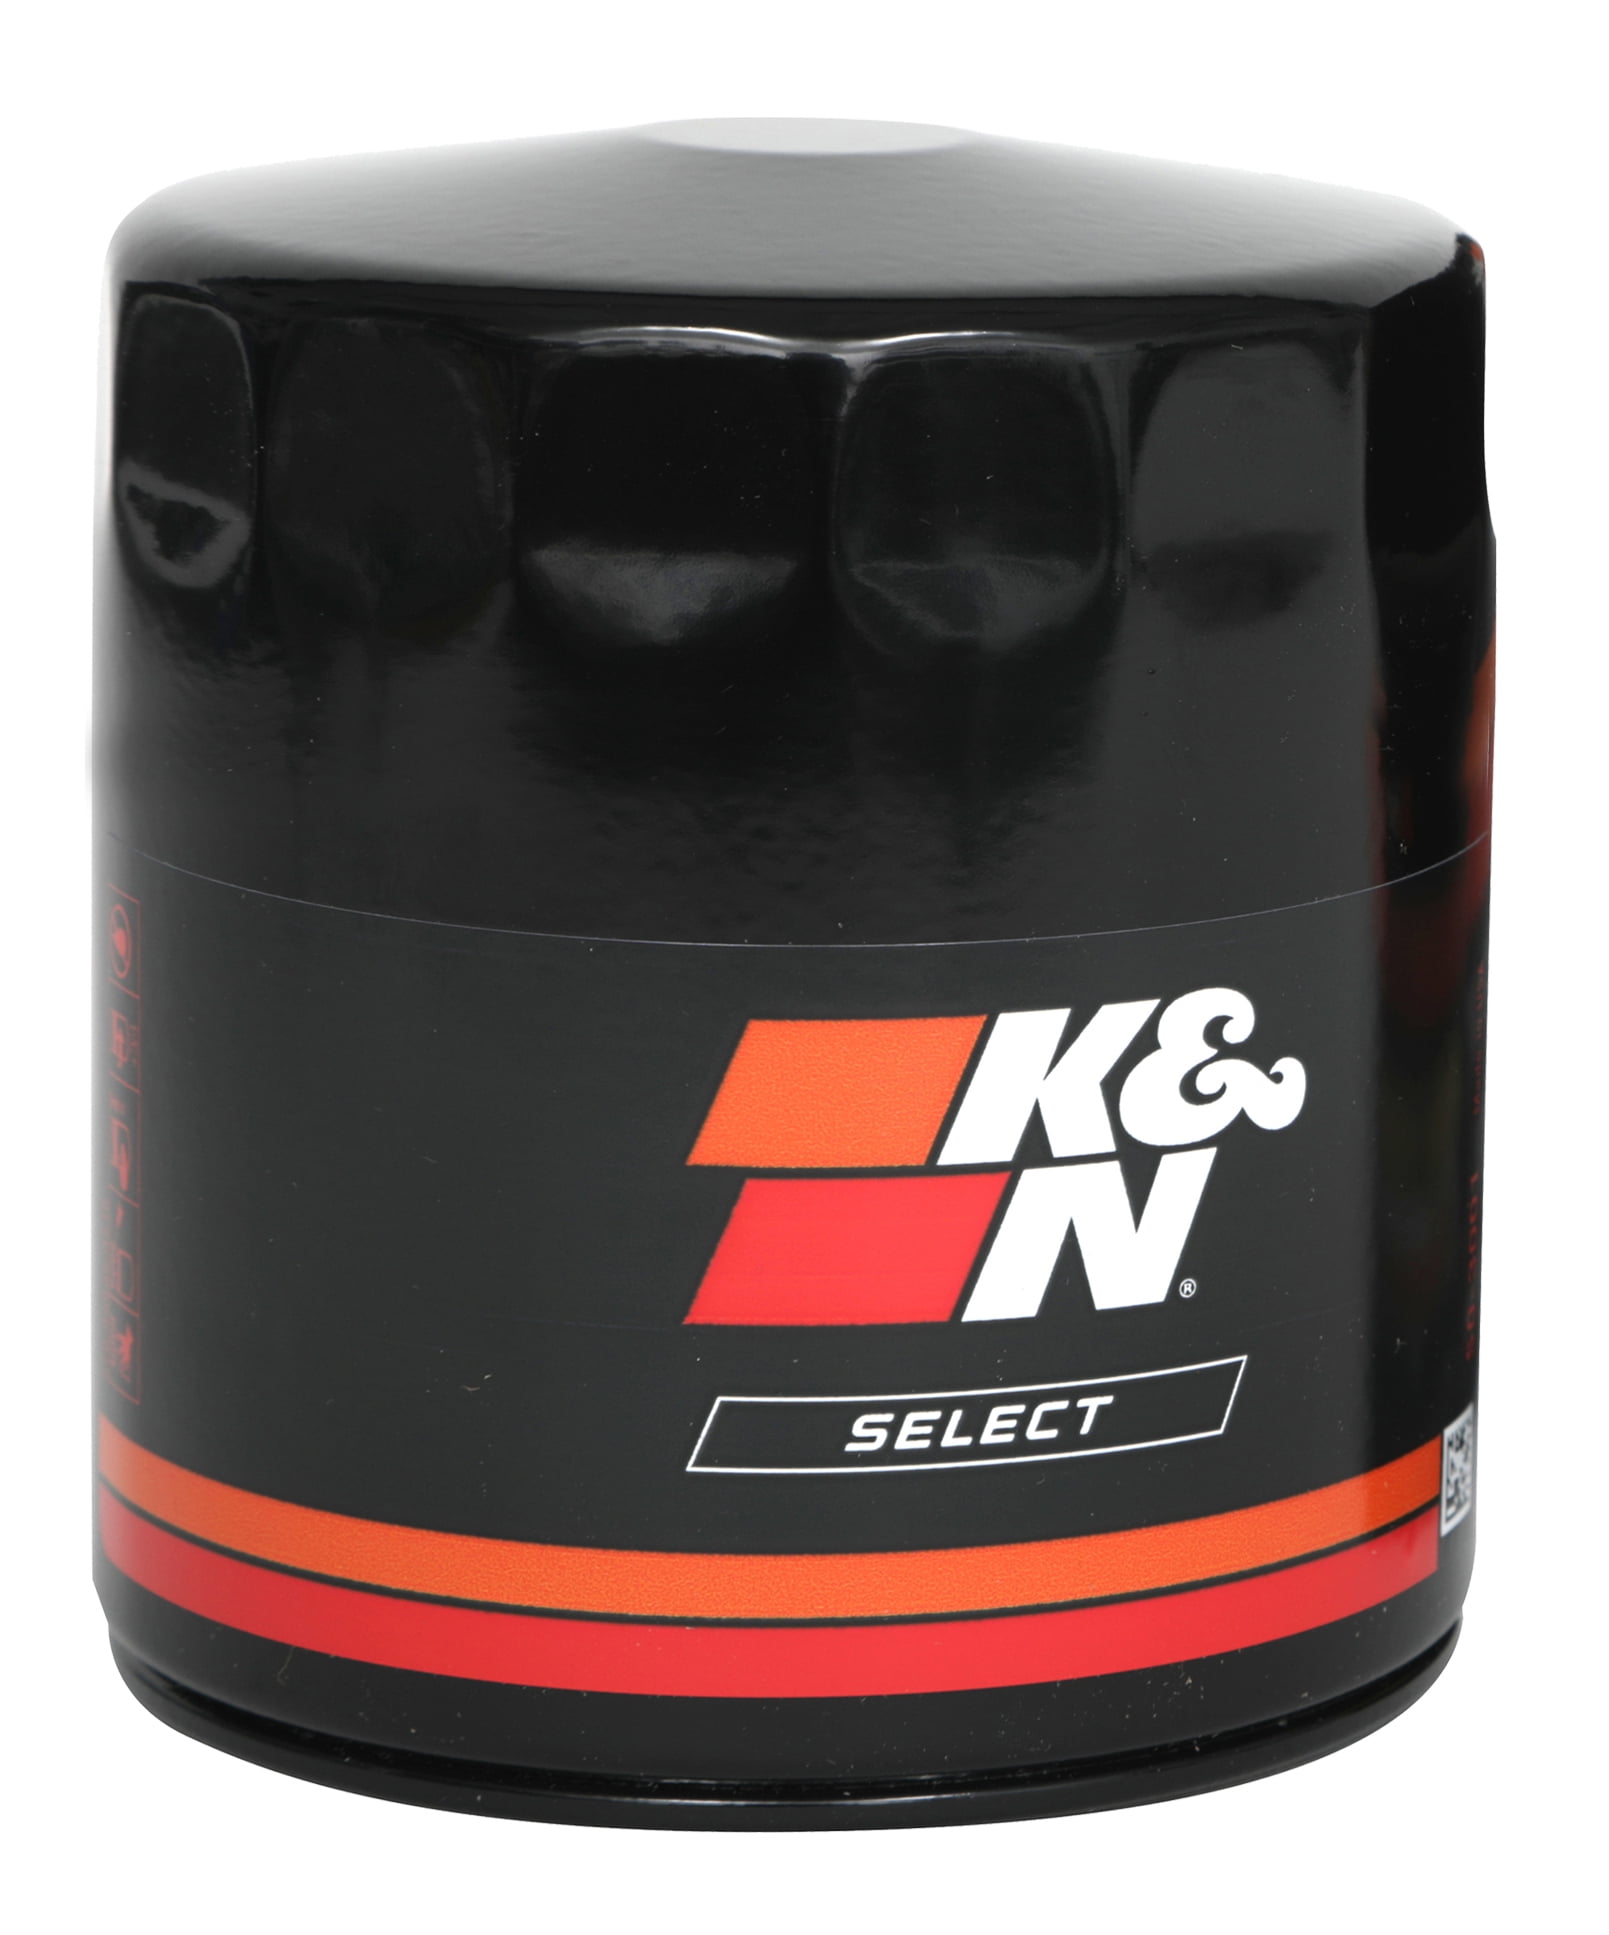 K&N Select Oil Filter SO-1010, Designed to Protect your Engine: Fits Select ACURA/HONDA/MITSUBISHI/NISSAN Vehicle Models